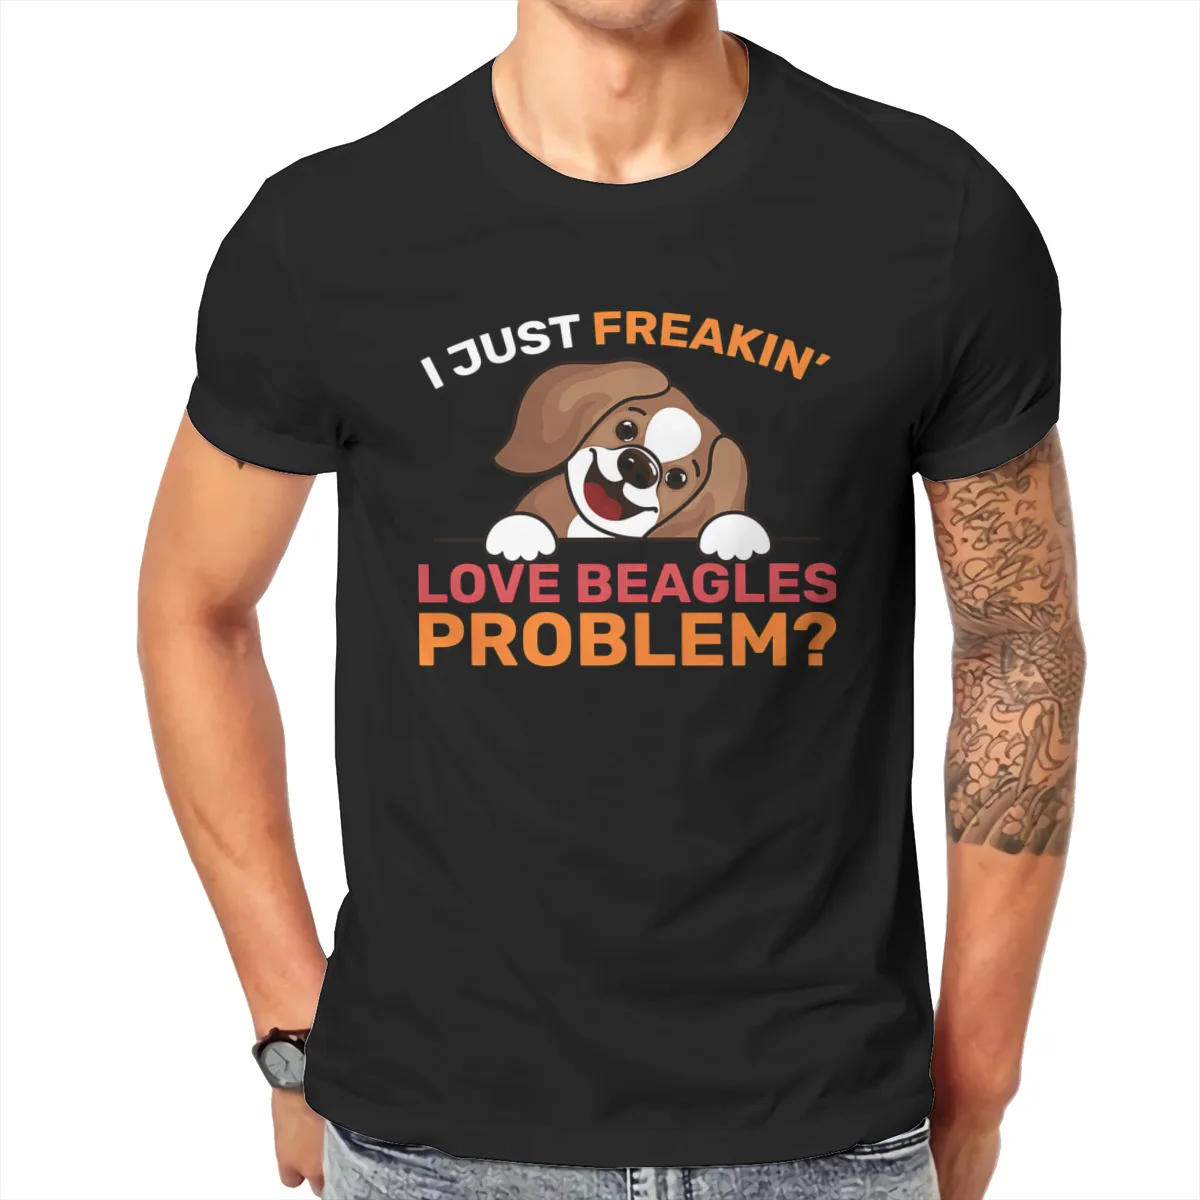 

Beagles I Just Freakin Love Dogs Problem Paw Dog Breed Paws Puppy Pup Pets Tshirt Design T shirt Men T shirt summer T-shirt